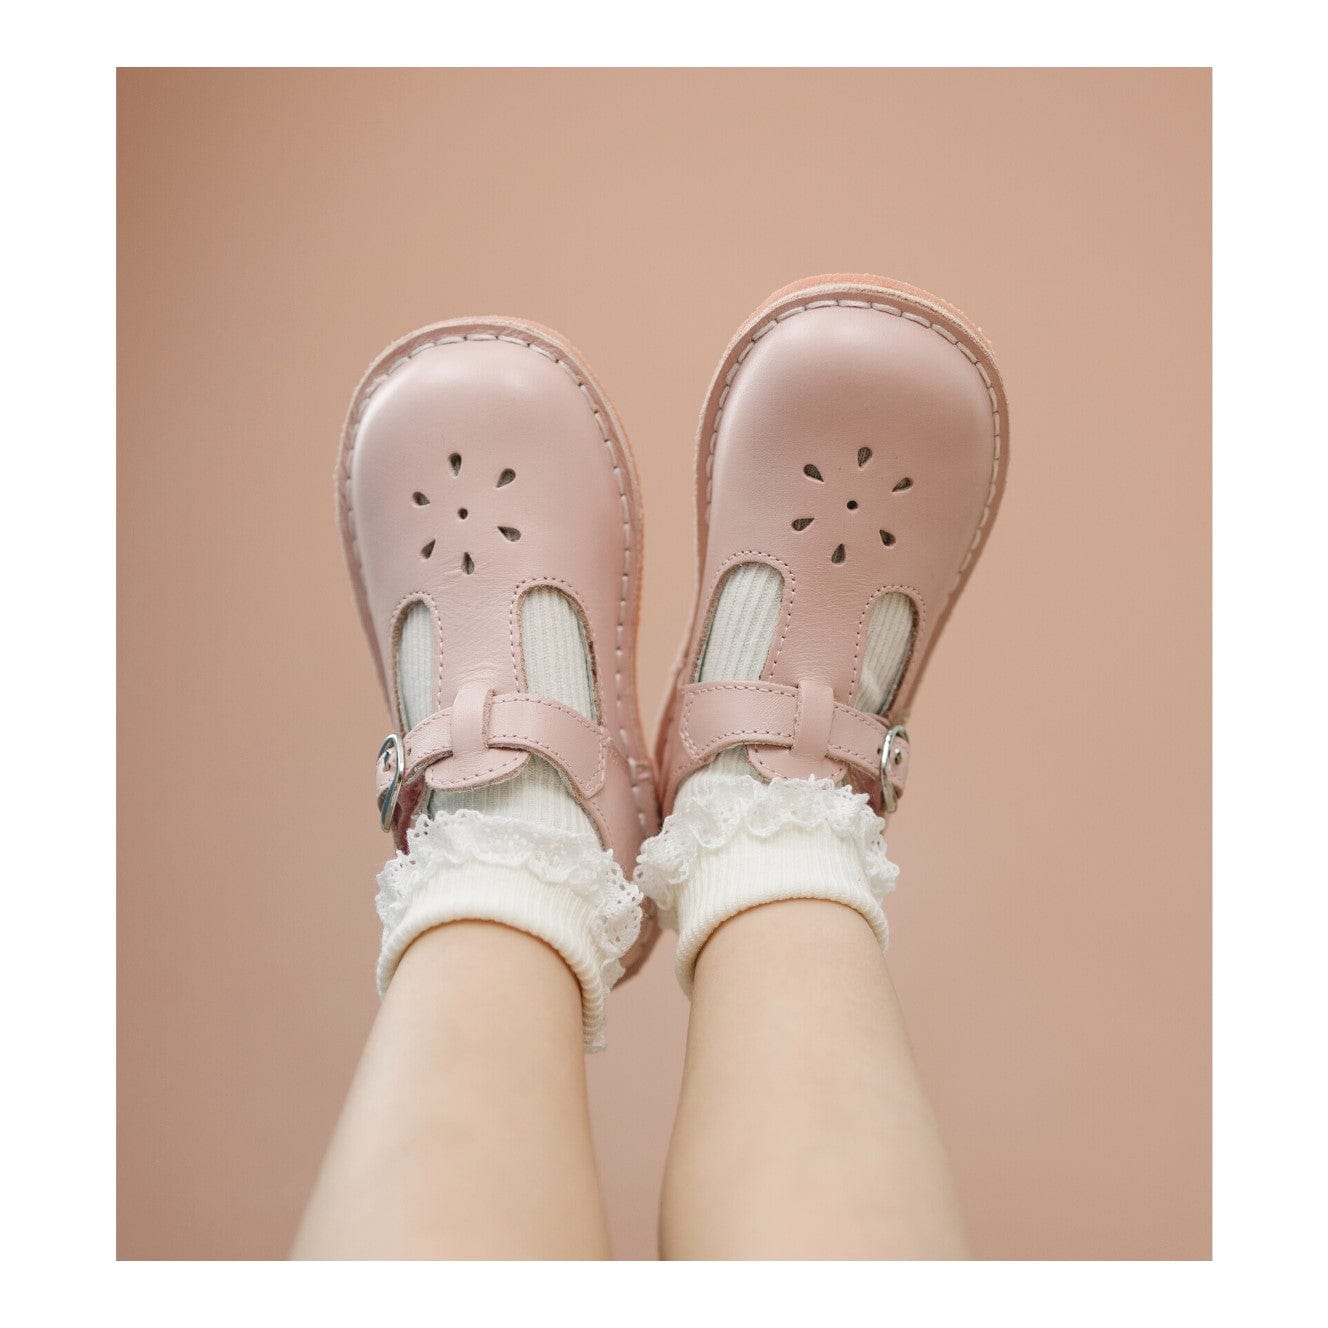 L'Amour Shoes L'Amour Joy Classic Leather T-Strap Mary Jane Pink - Little Miss Muffin Children & Home